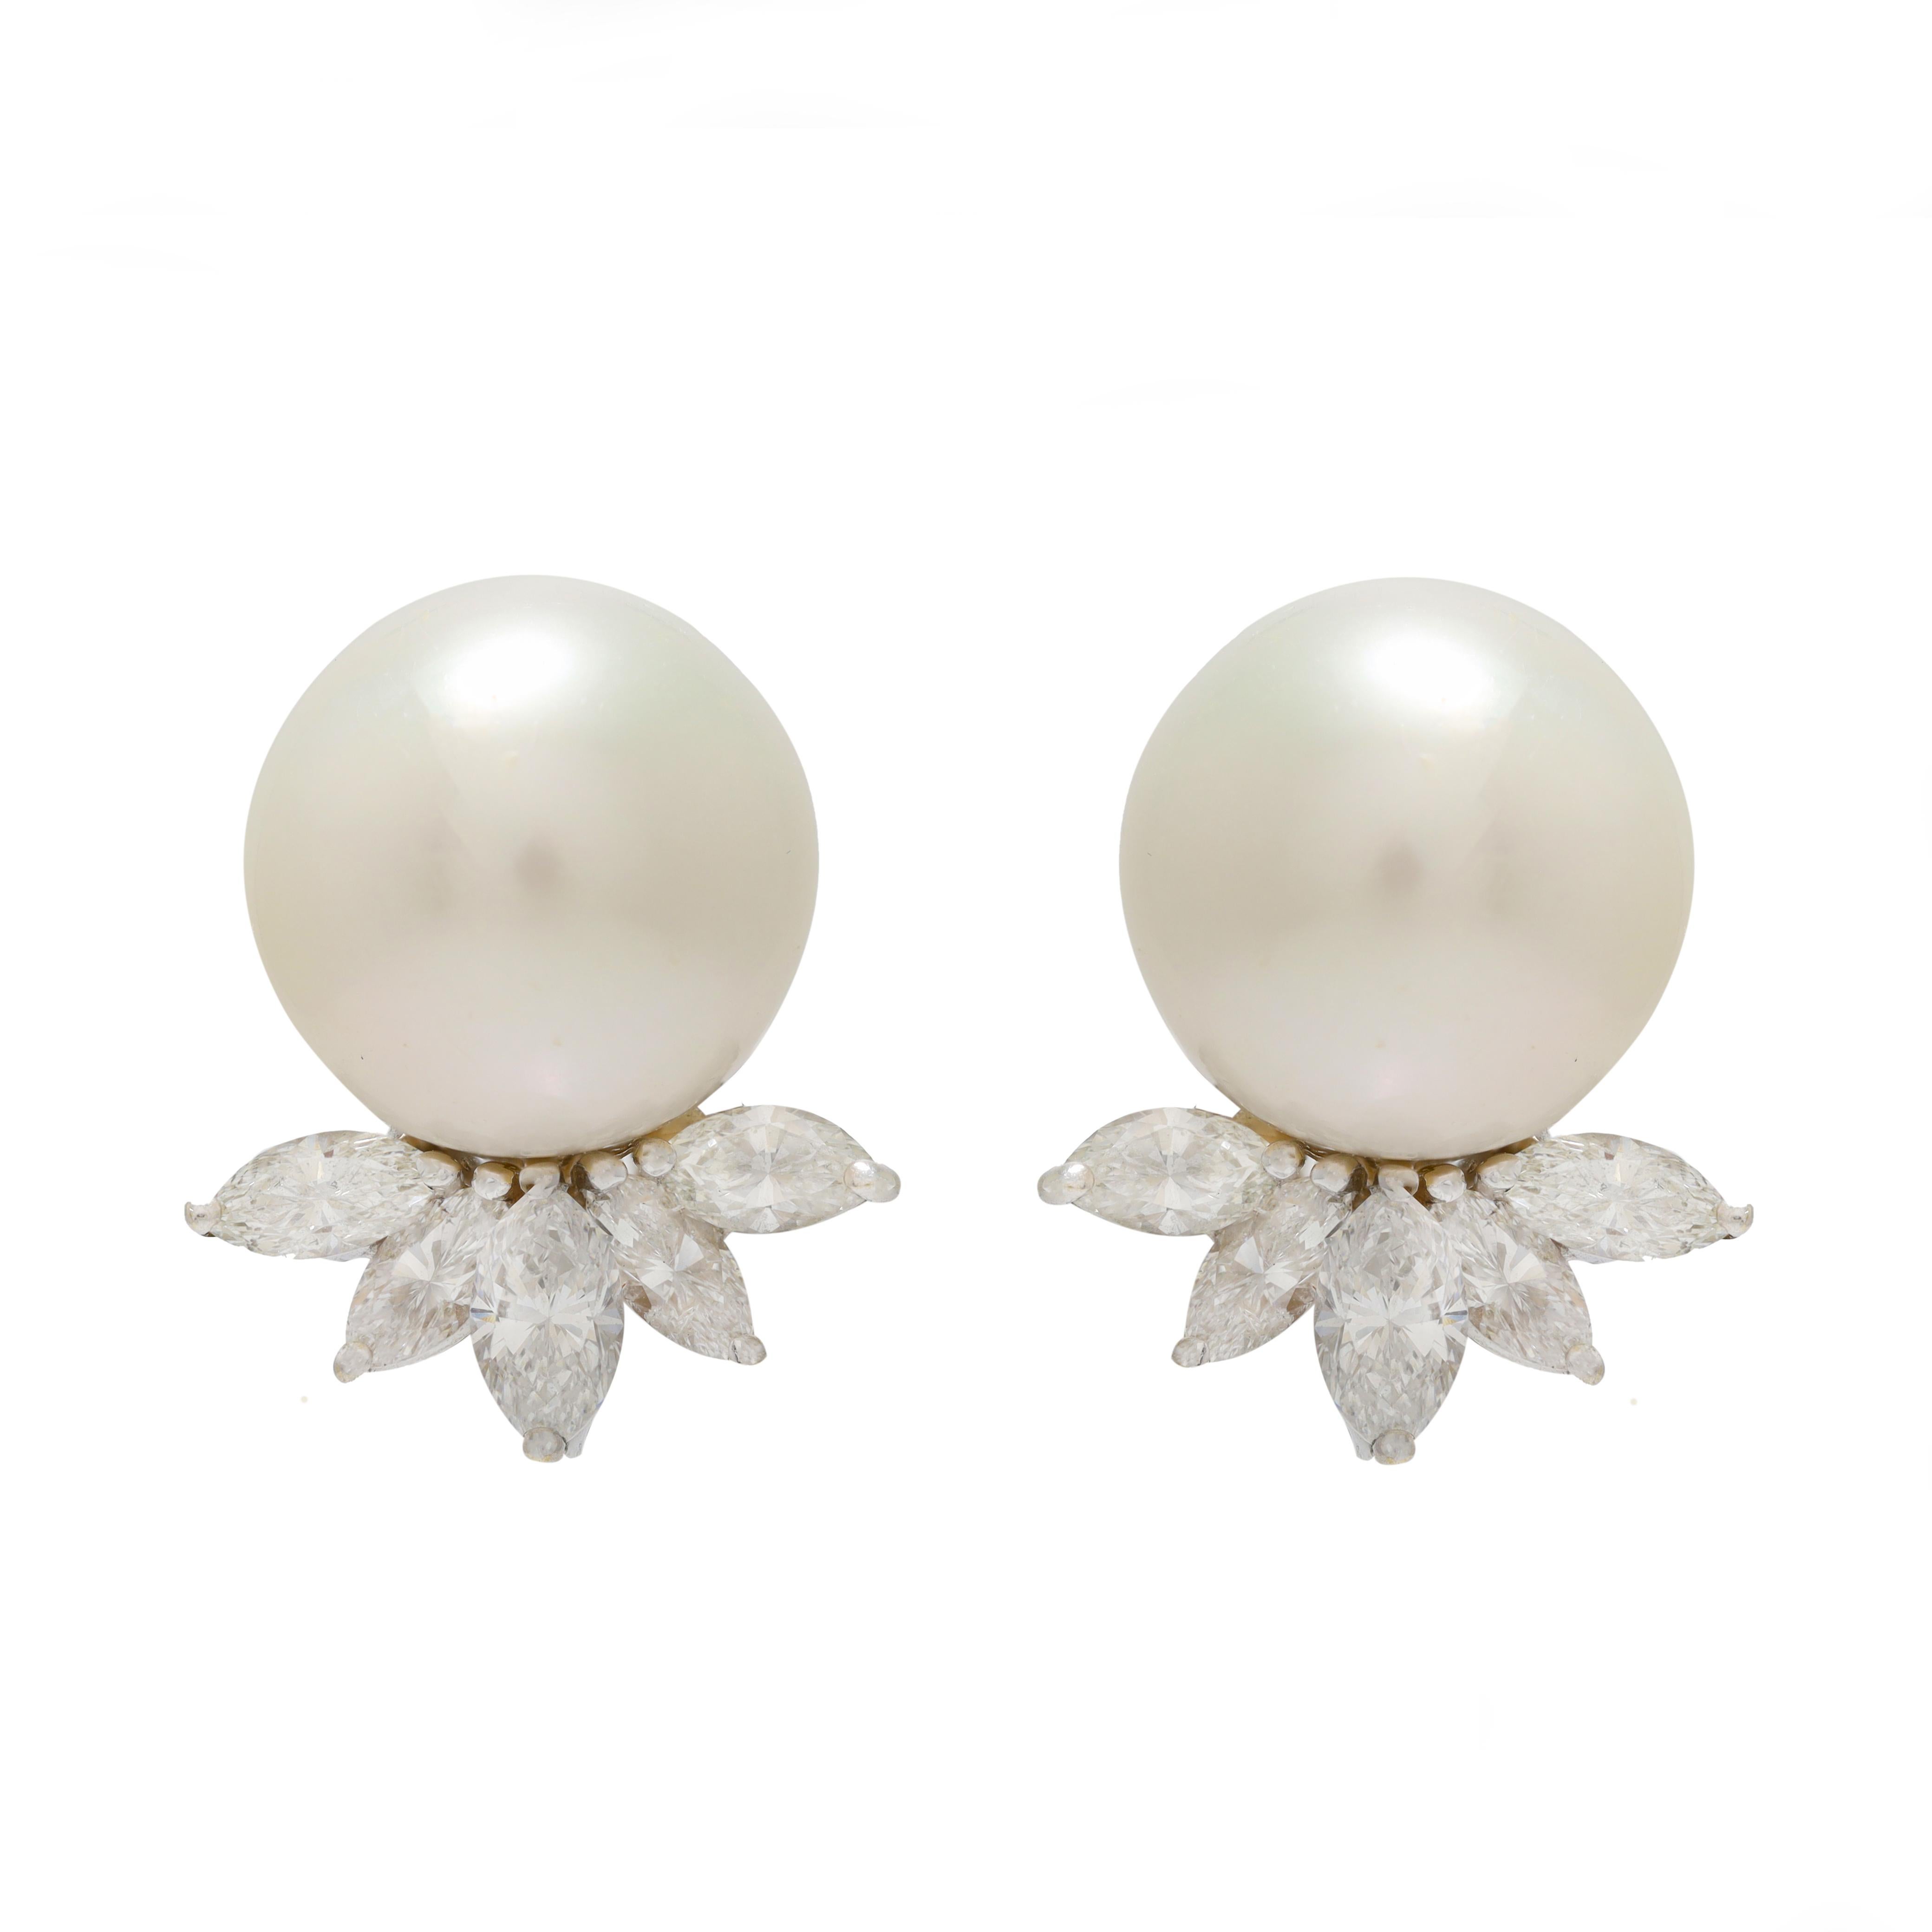 18 kt white gold diamond and pearl stud earrings featuring a 14 mm white pearls and 2.55 cts tw of marquise cut diamonds in a fan pattern.
Diana M. is a leading supplier of top-quality fine jewelry for over 35 years.
Diana M is one-stop shop for all